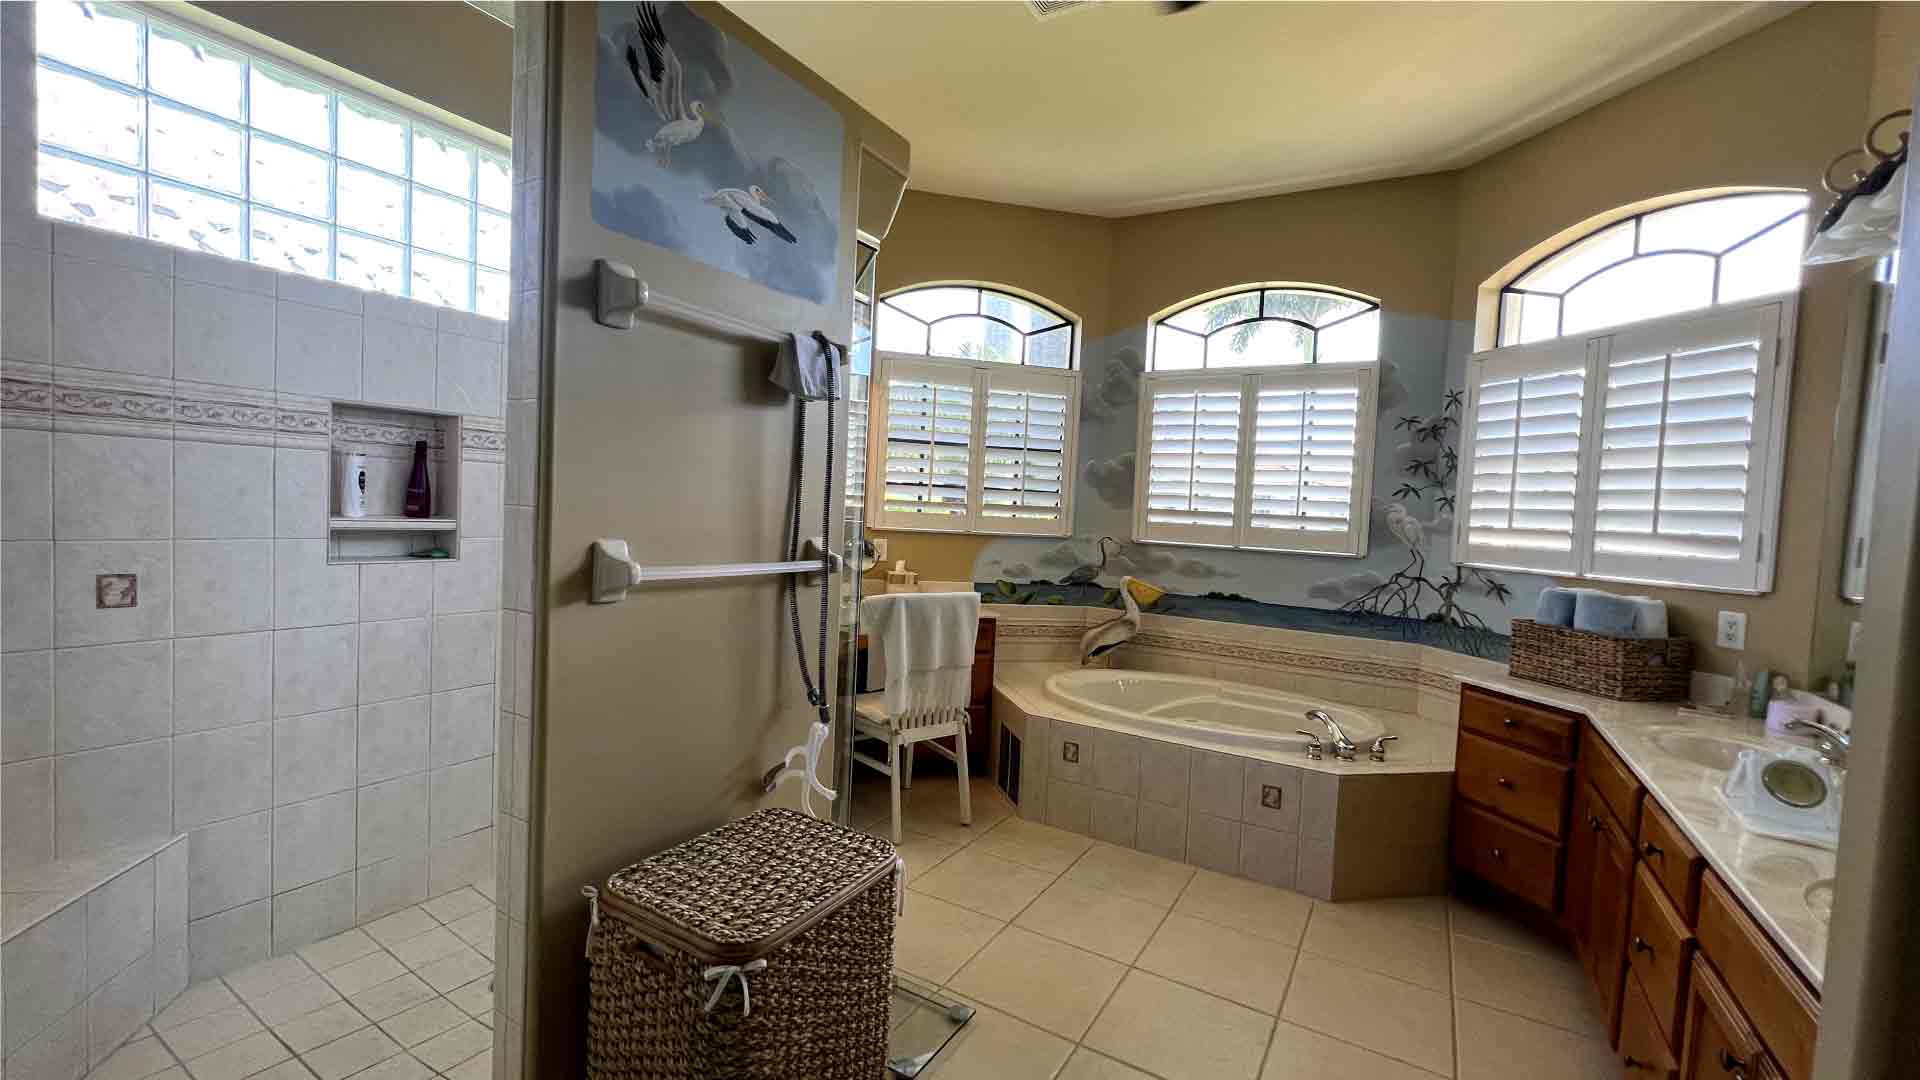 Bathroom - Regular cleaning in Cape Coral by Goldmillio - Apr 8